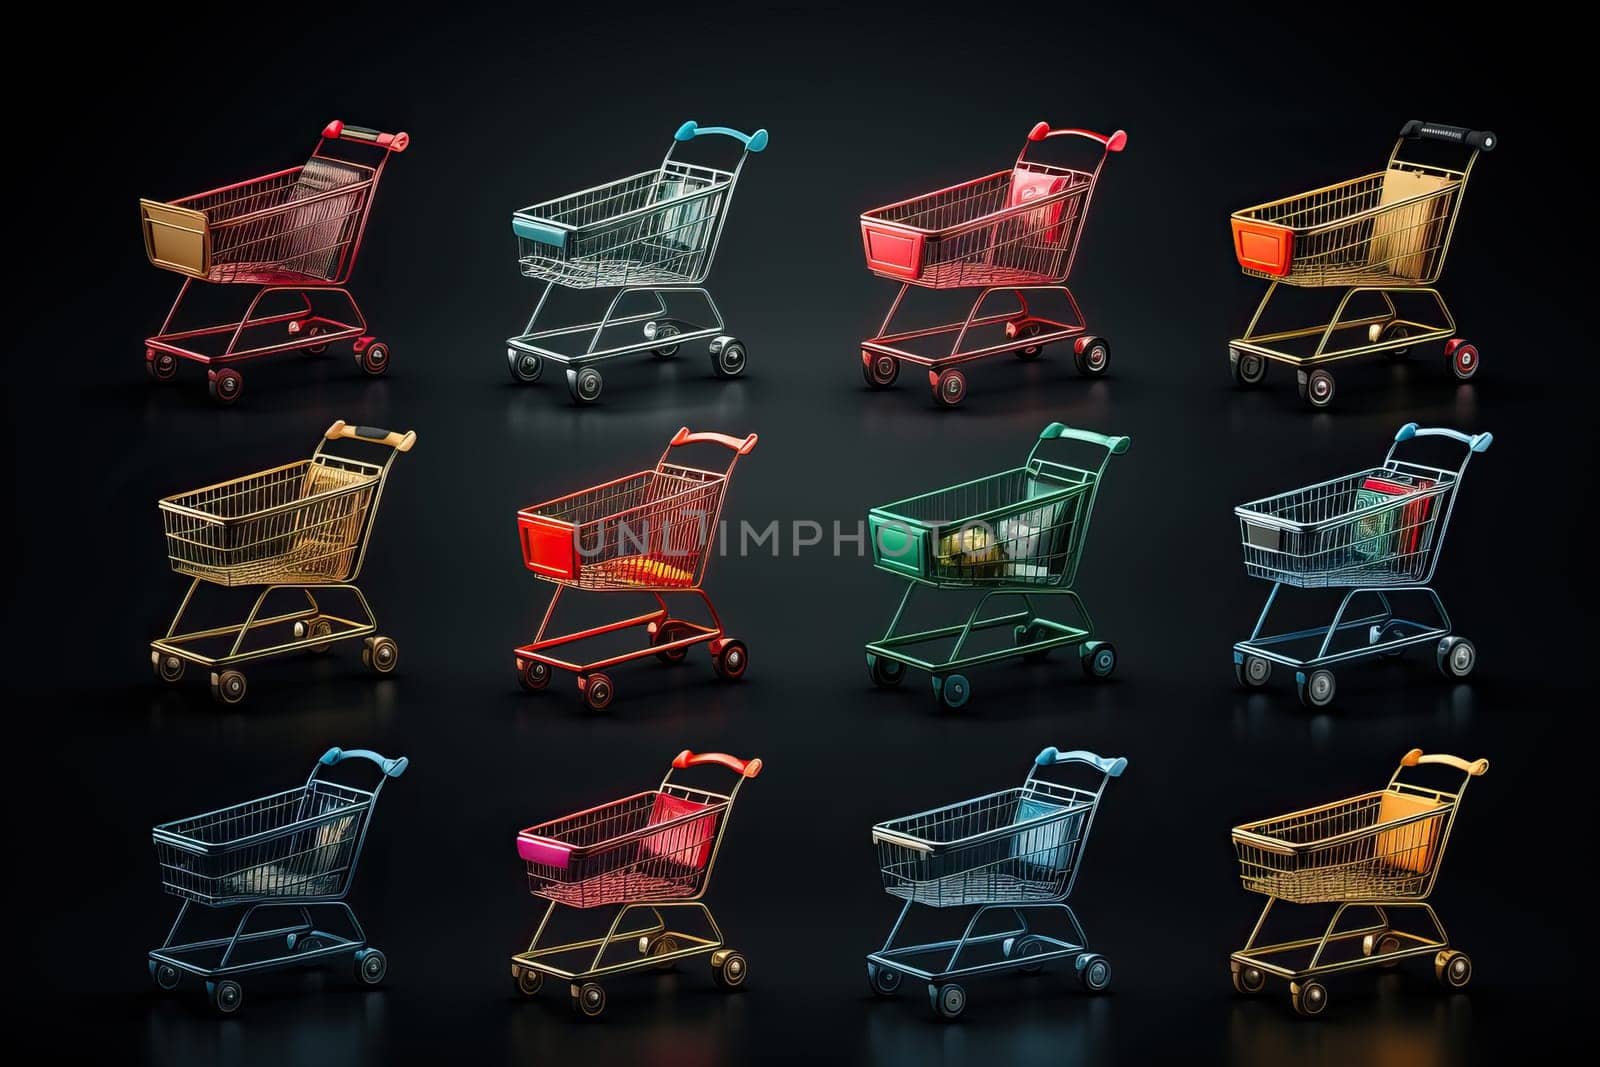 A set of colorful baskets for products in a supermarket. by Niko_Cingaryuk